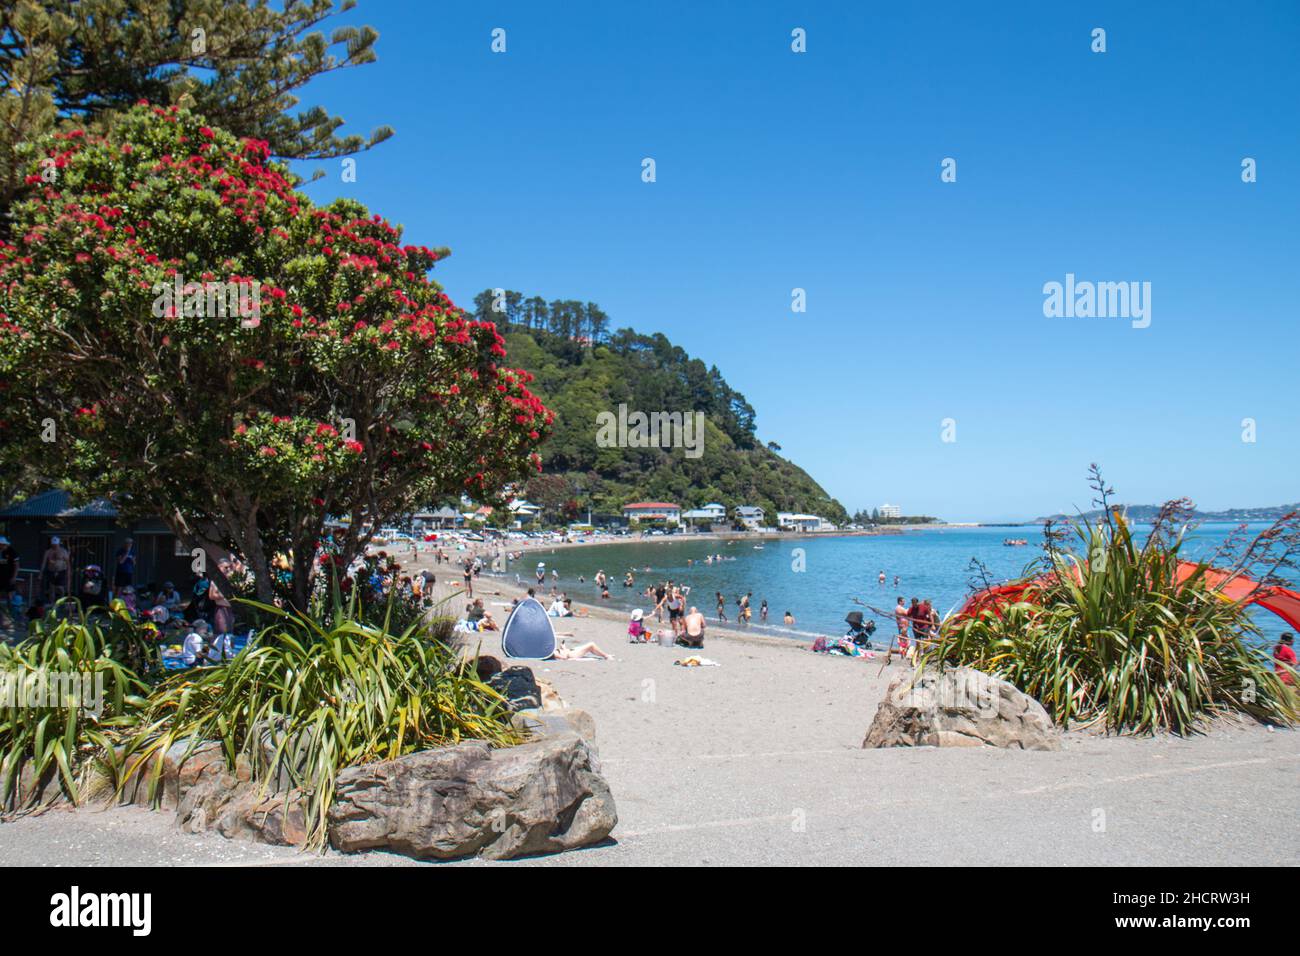 Scorching and Crowded New Years Day 2022 at Days Bay, Wellington, New Zealand. Beach and a NZ Christmas Tree in bloom (Pōhutukawa) Stock Photo